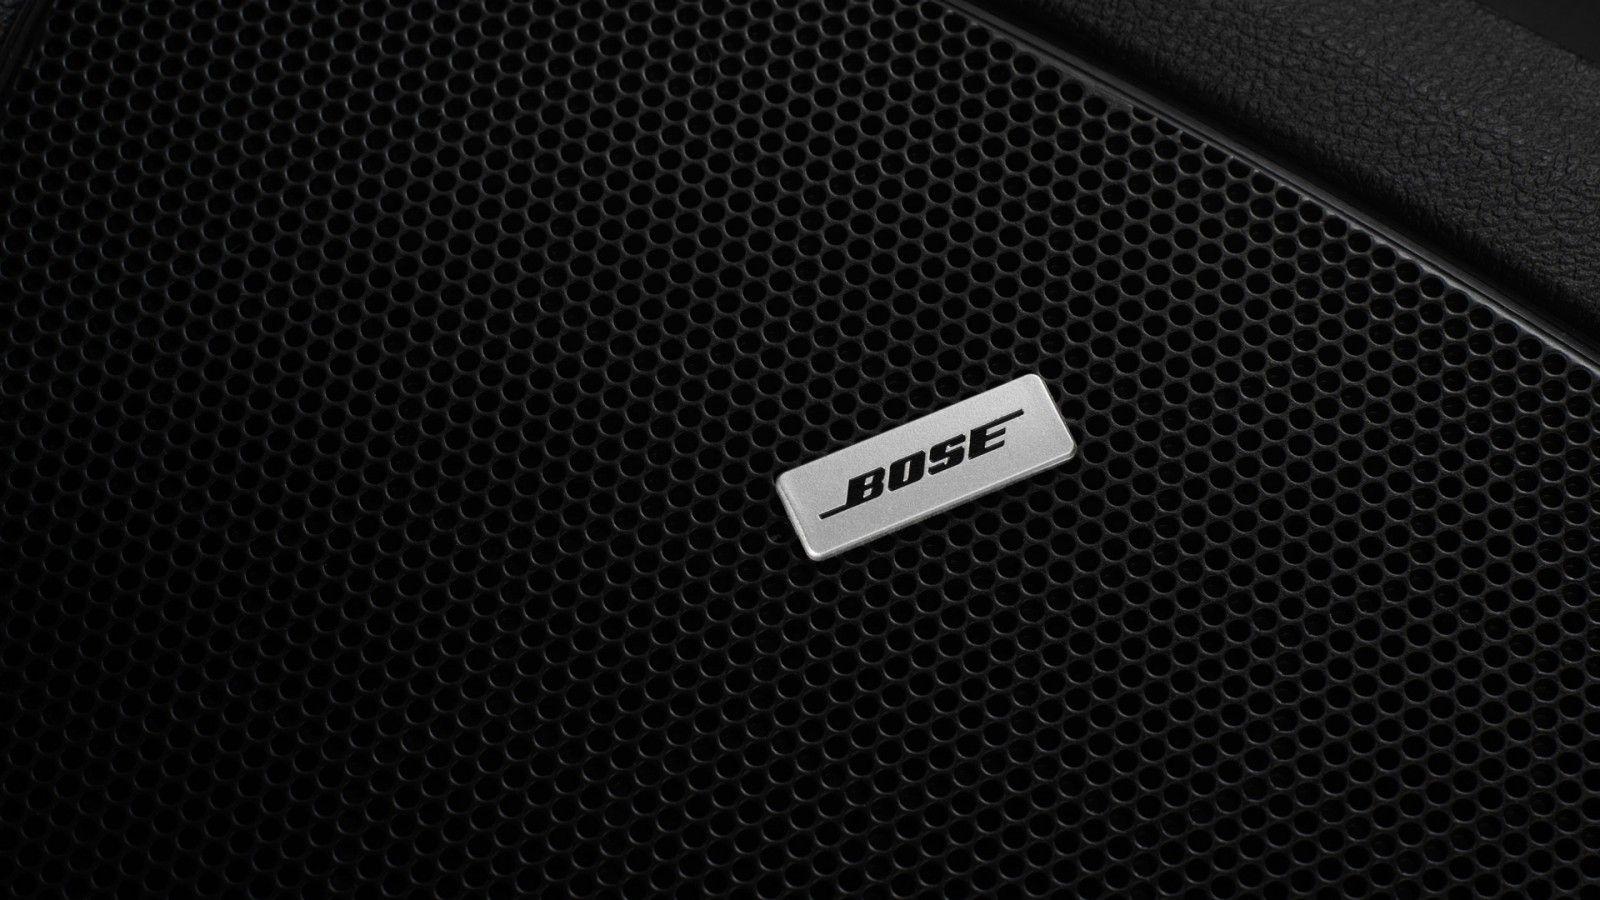 Top Chevy Bose System Output Wallpaper